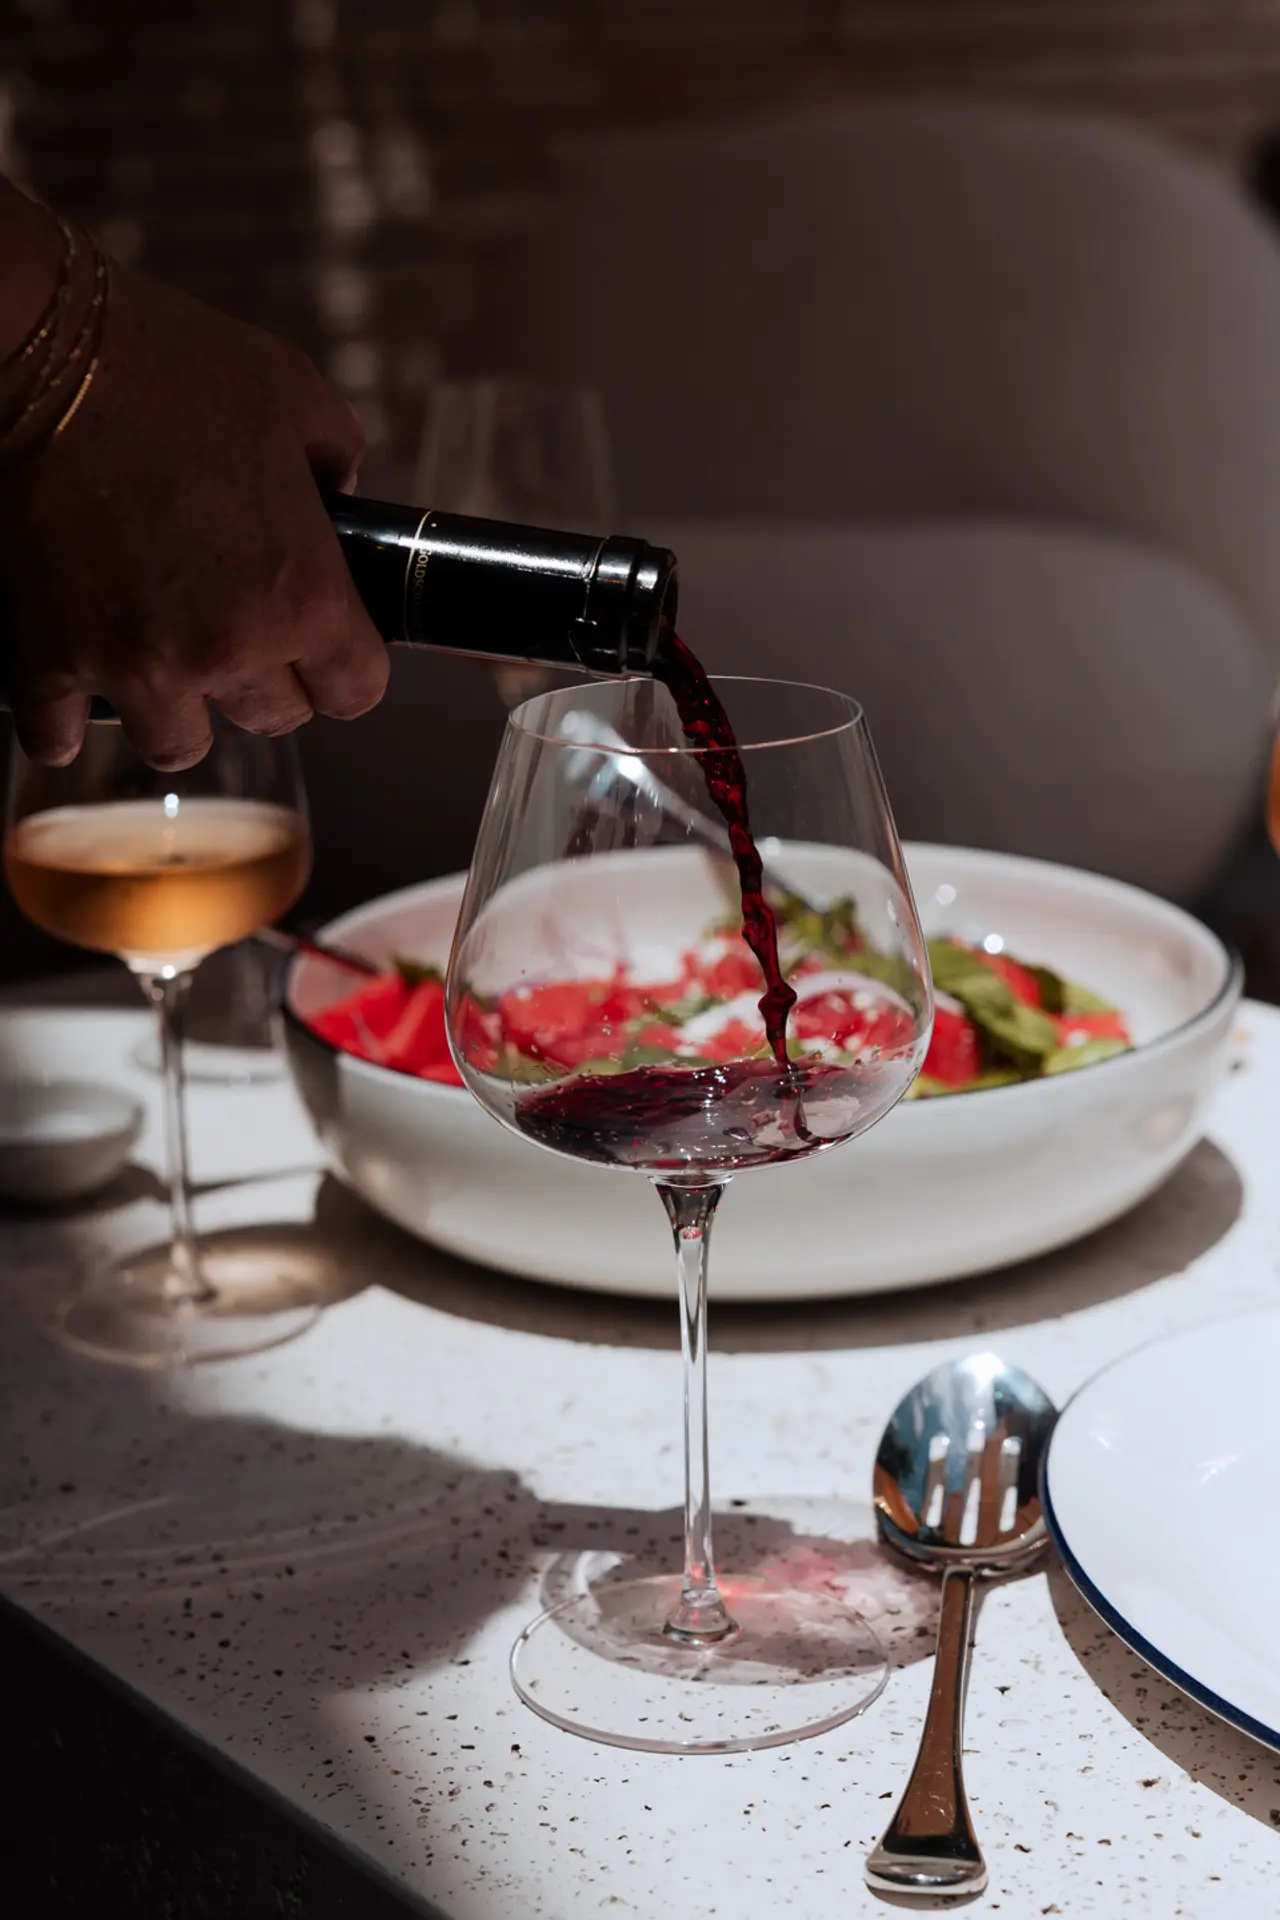 Red wine is being poured into a stemmed glass at a dining table with plates of food and another glass of beverage.